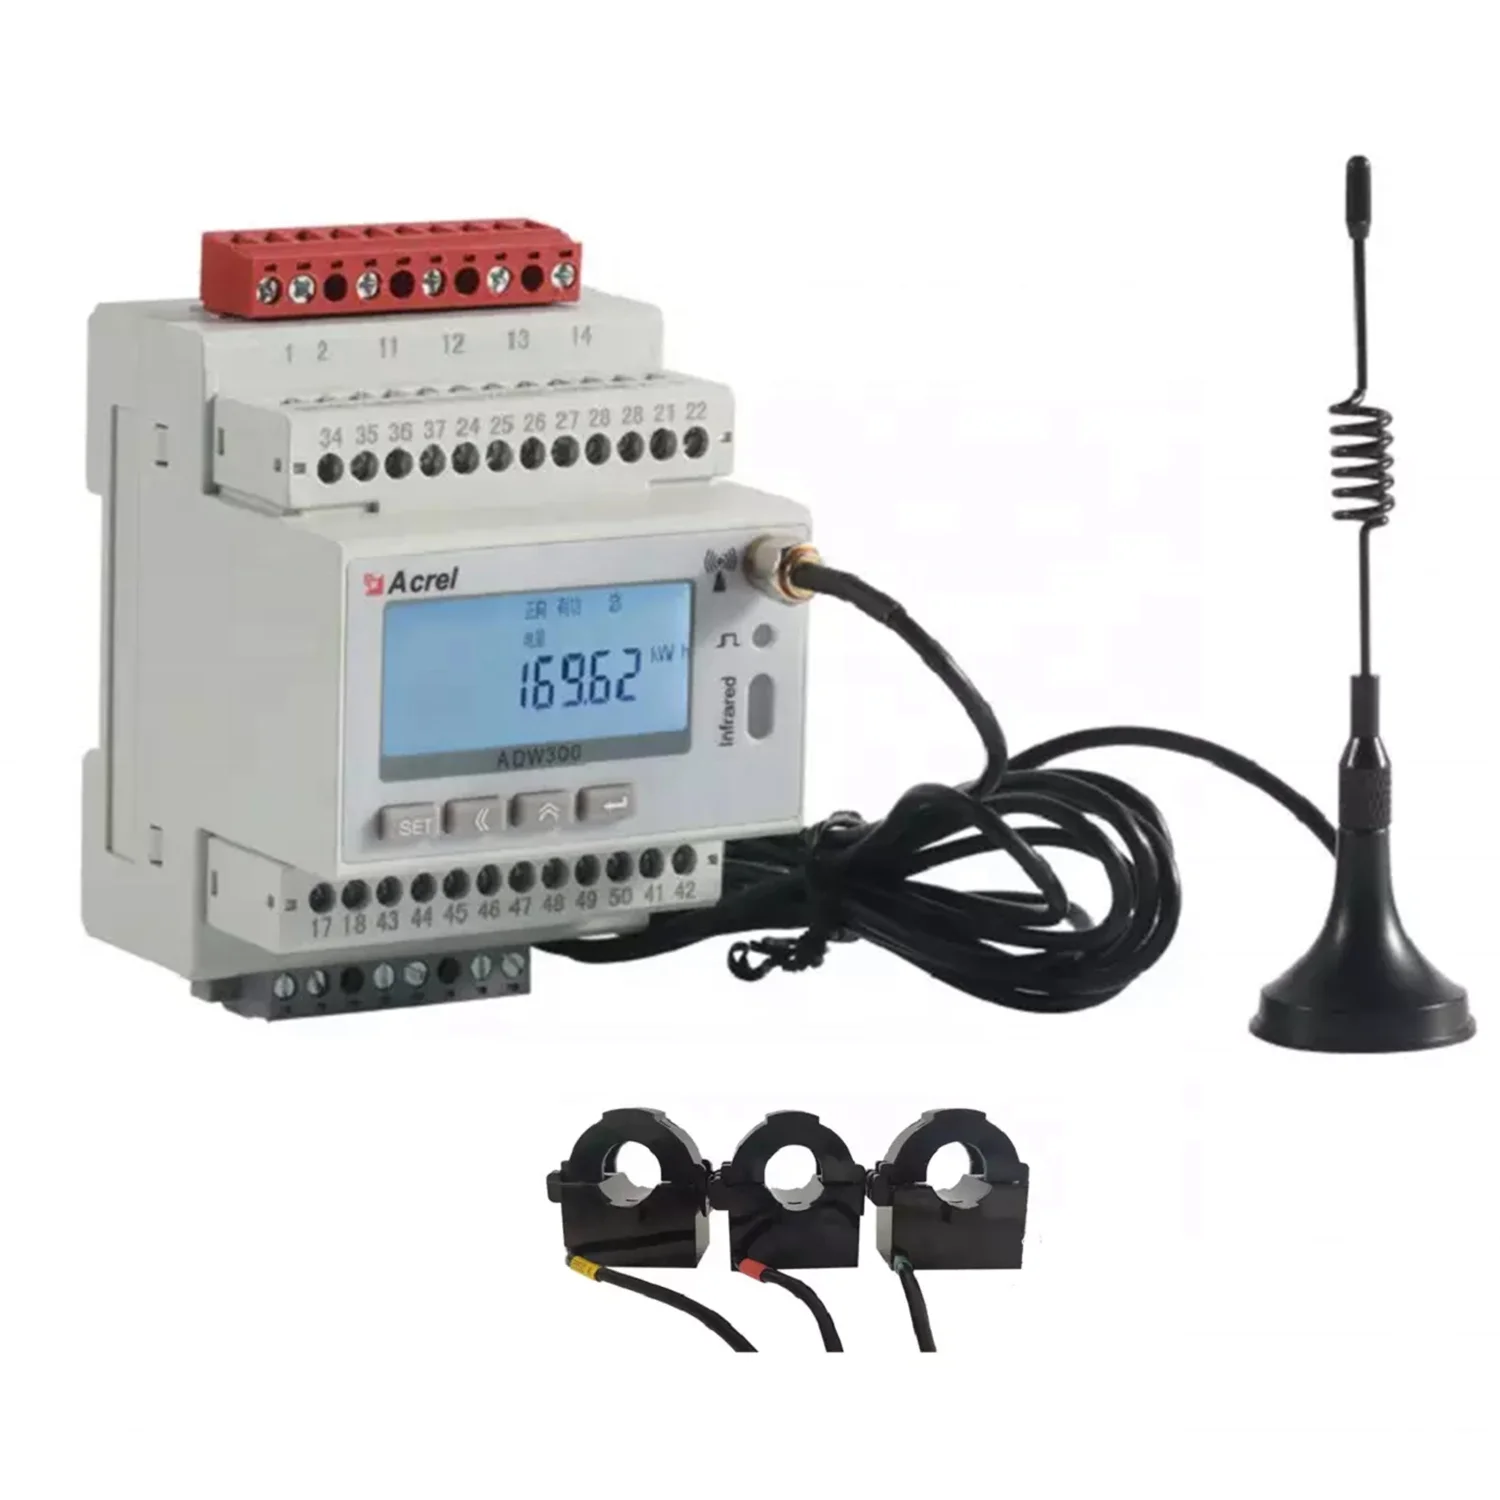 

ADW300W/LR Lora Wireless Communication IoT 3-phase Smart Energy Meter Electric Monitor LCD Display